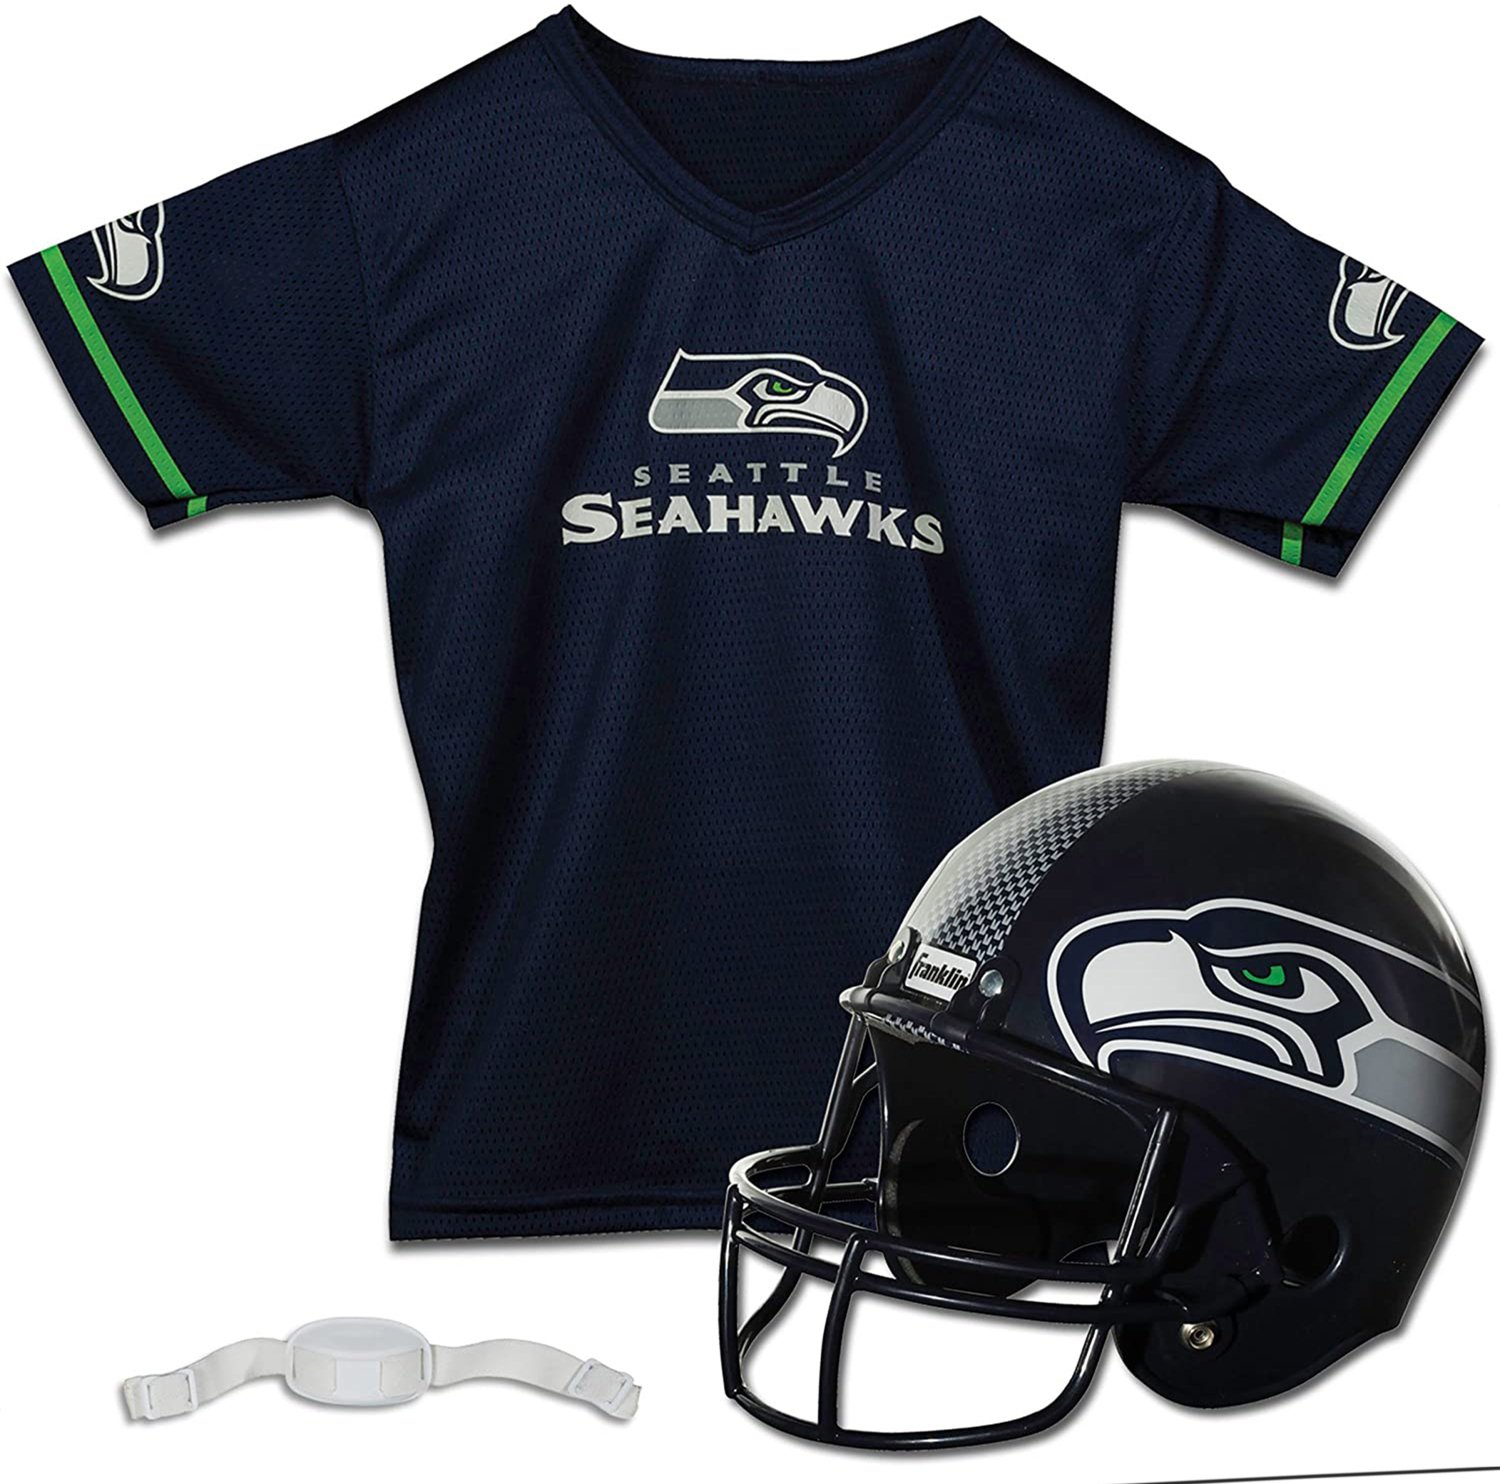 Franklin Youth Seattle Seahawks Helmet and Jersey Set